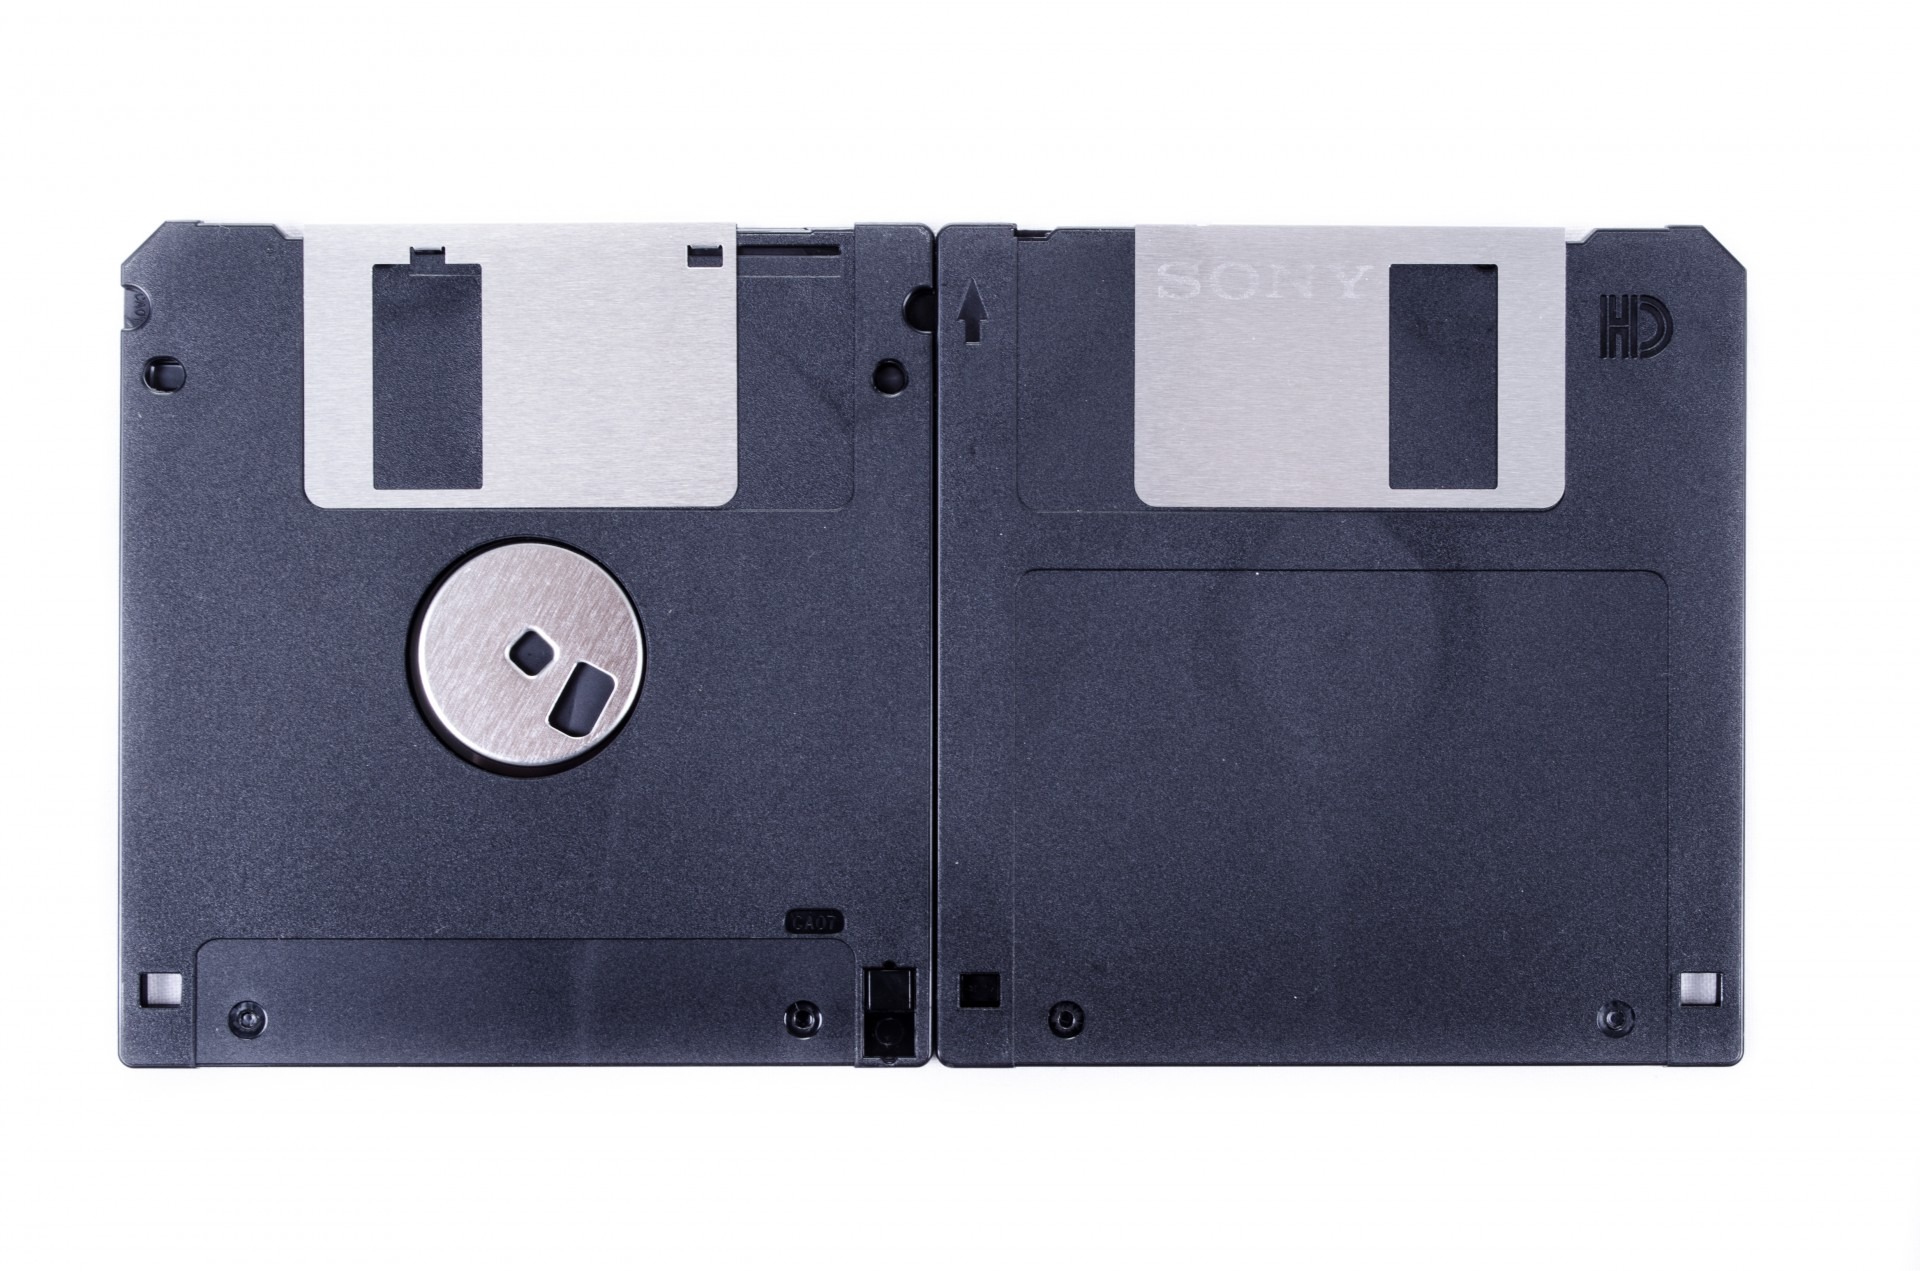 mac formatted floppy disk img